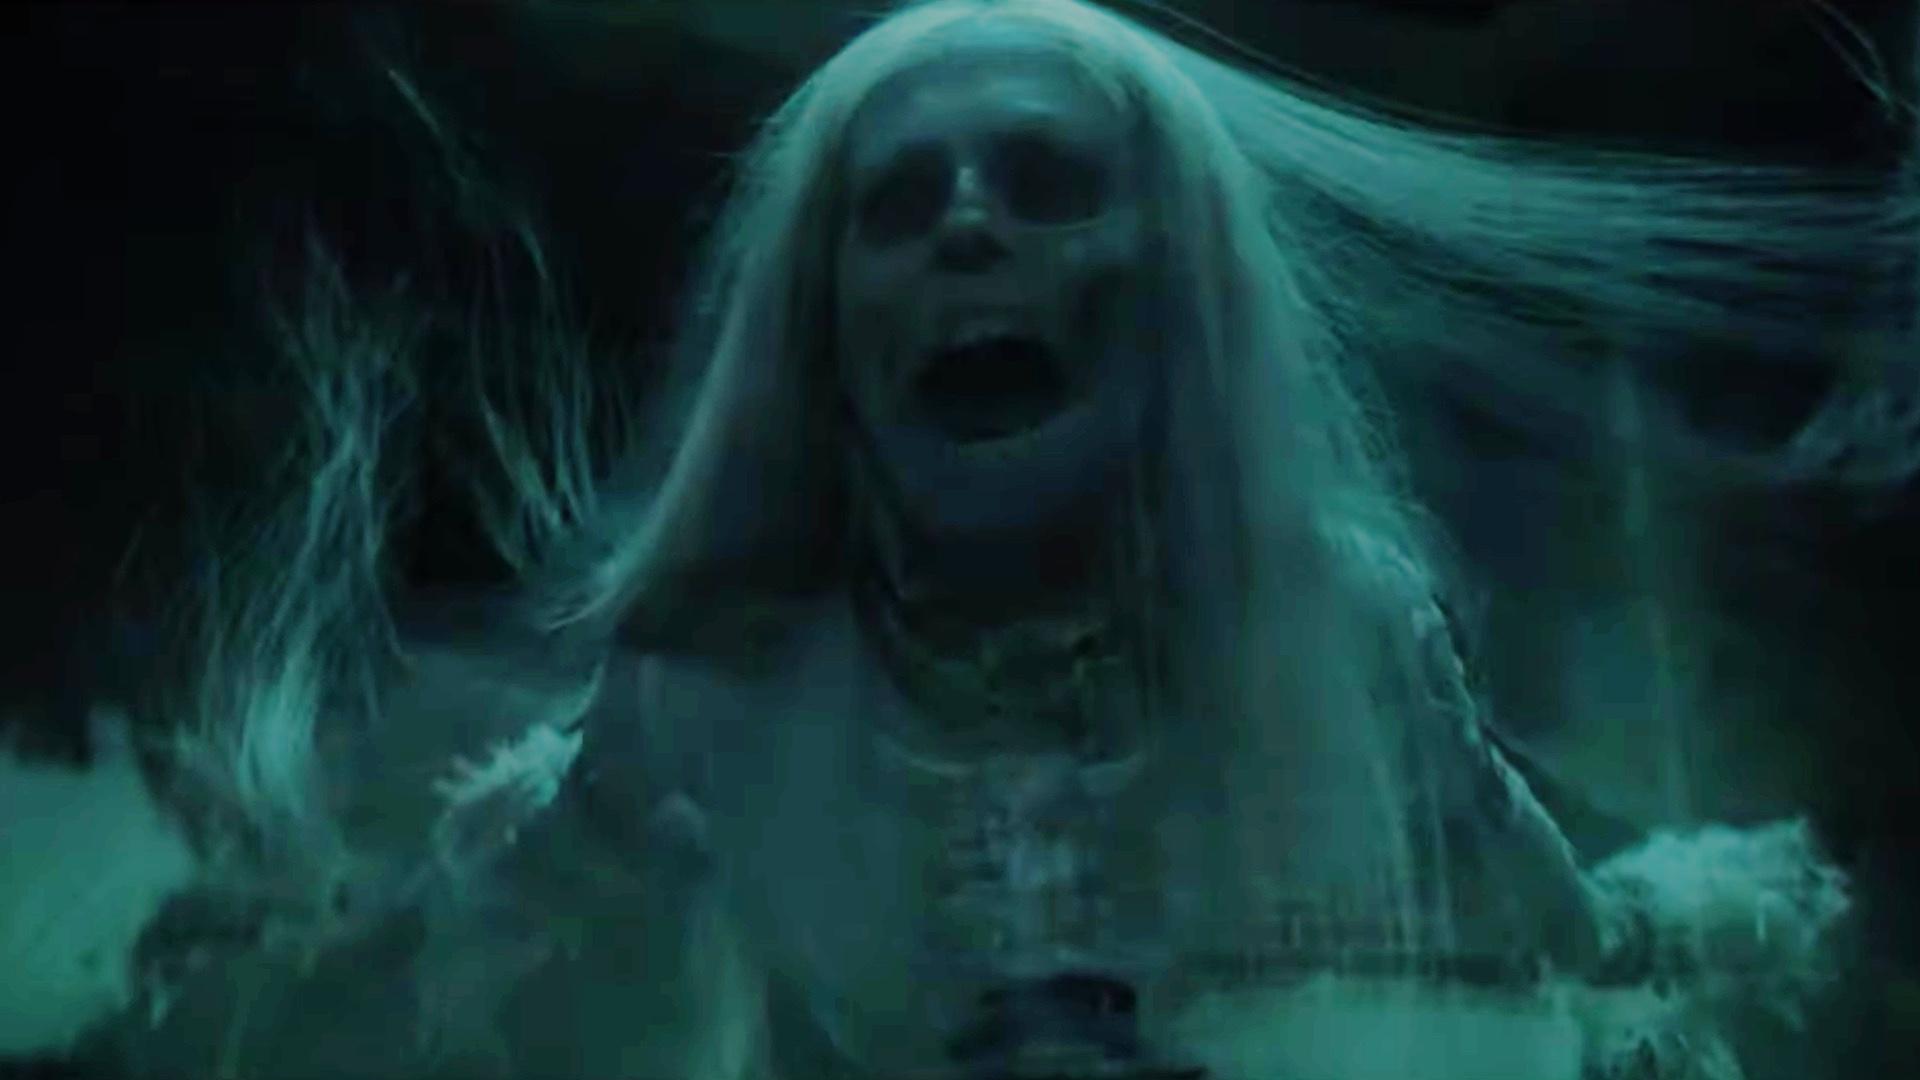 New TV Spot For SCARY STORIES TO TELL IN THE DARK Highlights Sarah